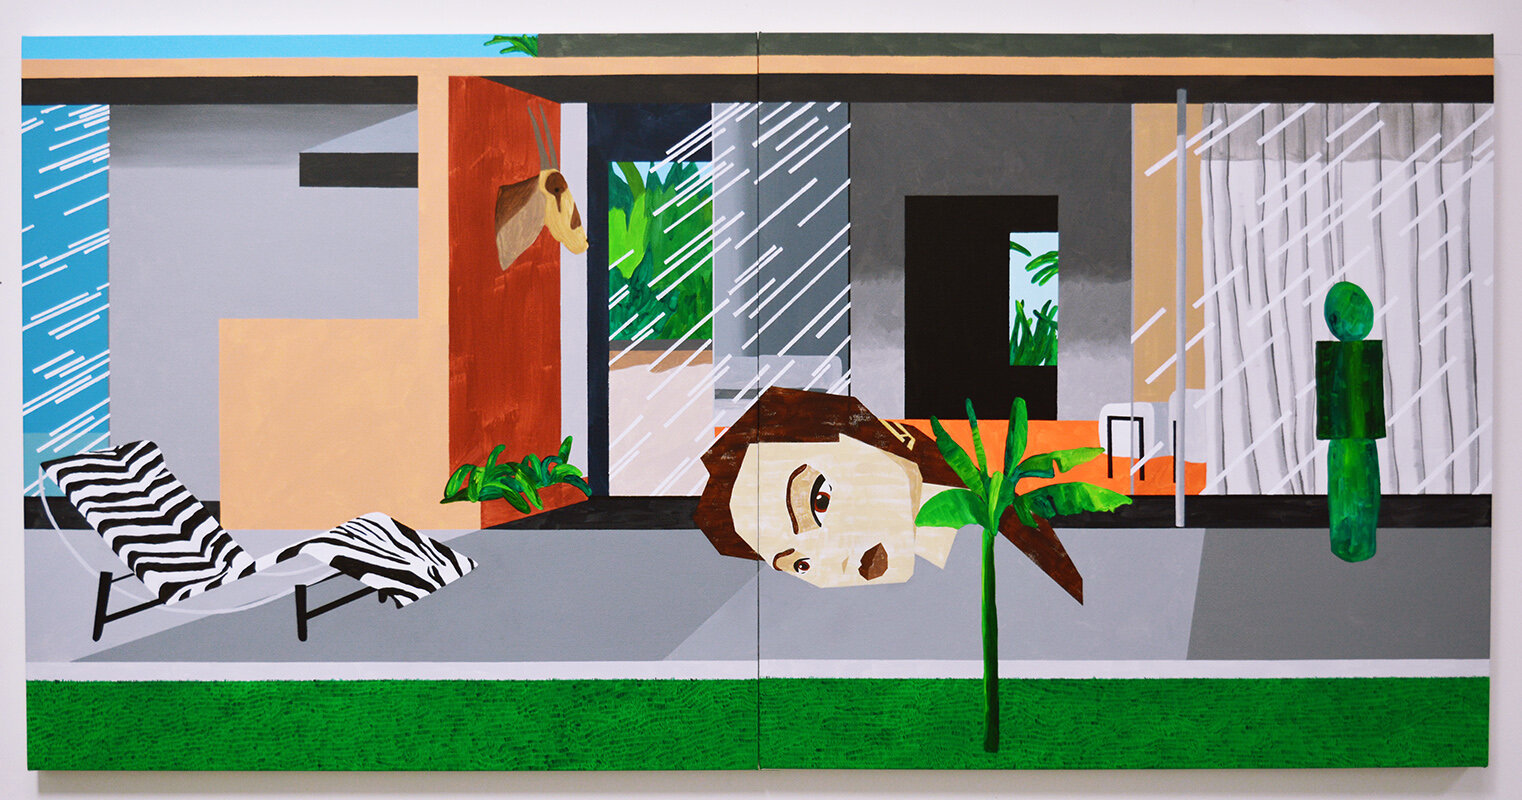 Beverly Hills Housewife 2017 Acrylic and permanent pigmented ink on canvas on canvas 100x200cm (39.37x78.74in) MICHAEL PYBUS.jpg